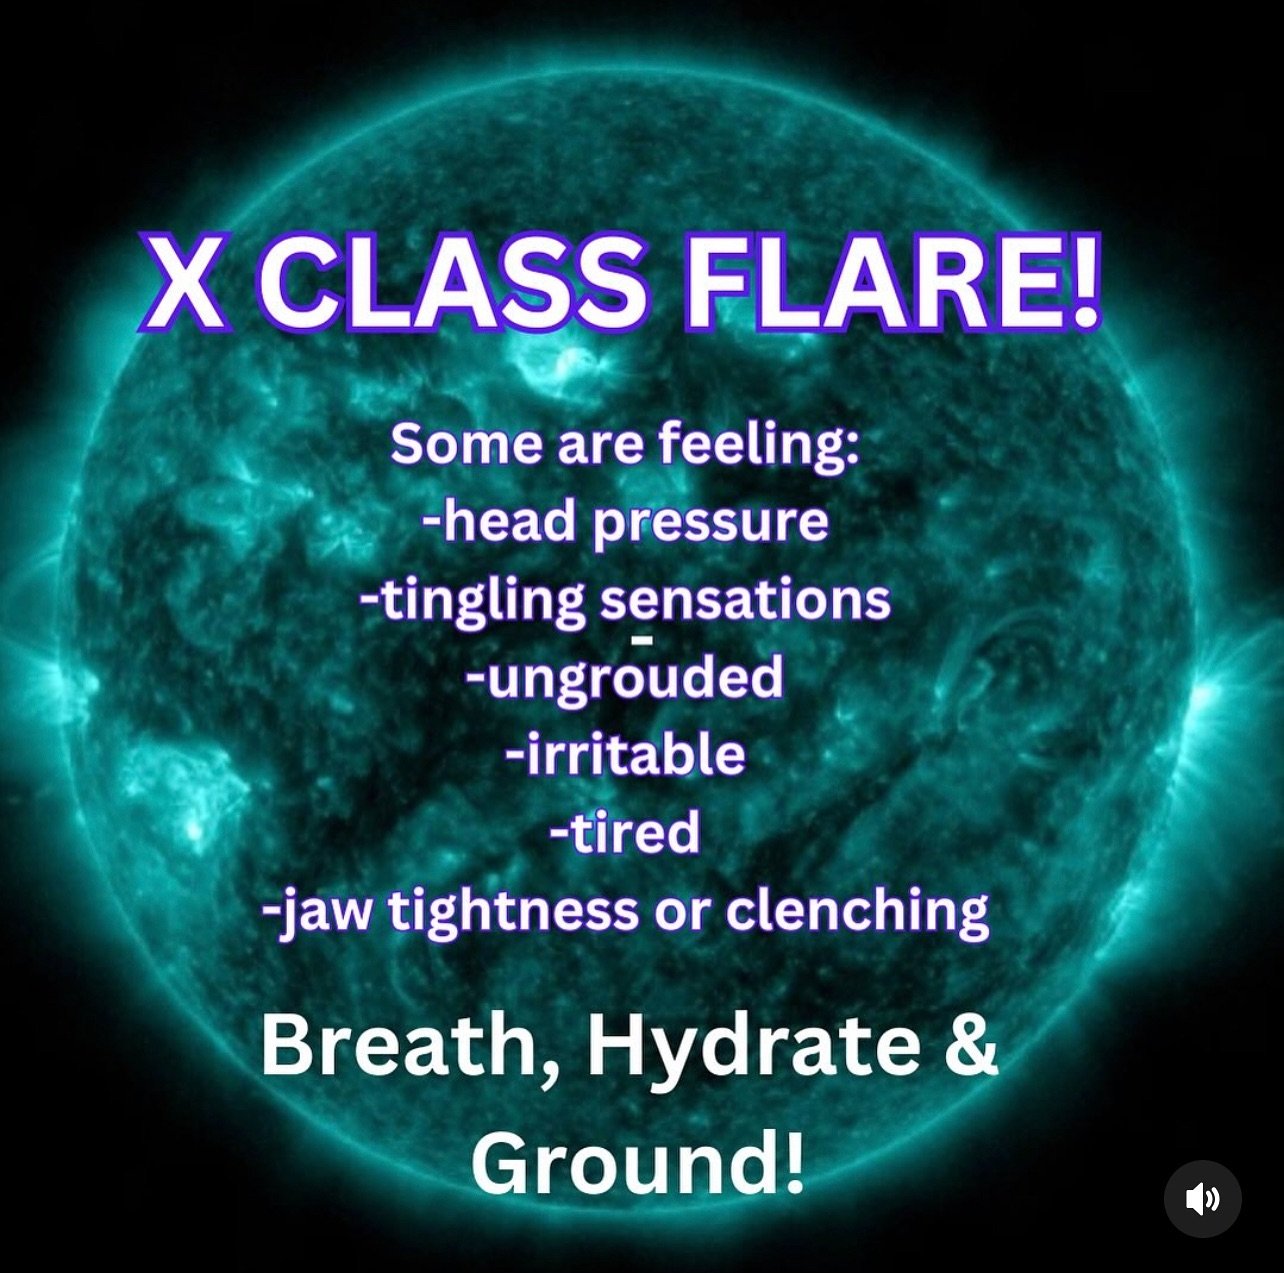 Solar flares to clear up the channel for you. Enjoy the ride. 
.
.
.
#solarflare #solarflares #ascension #ascensionsymptoms #ascensionprocess #ascensionenergies #spiritualawakening #spiritualawakenings #collectiveenergy